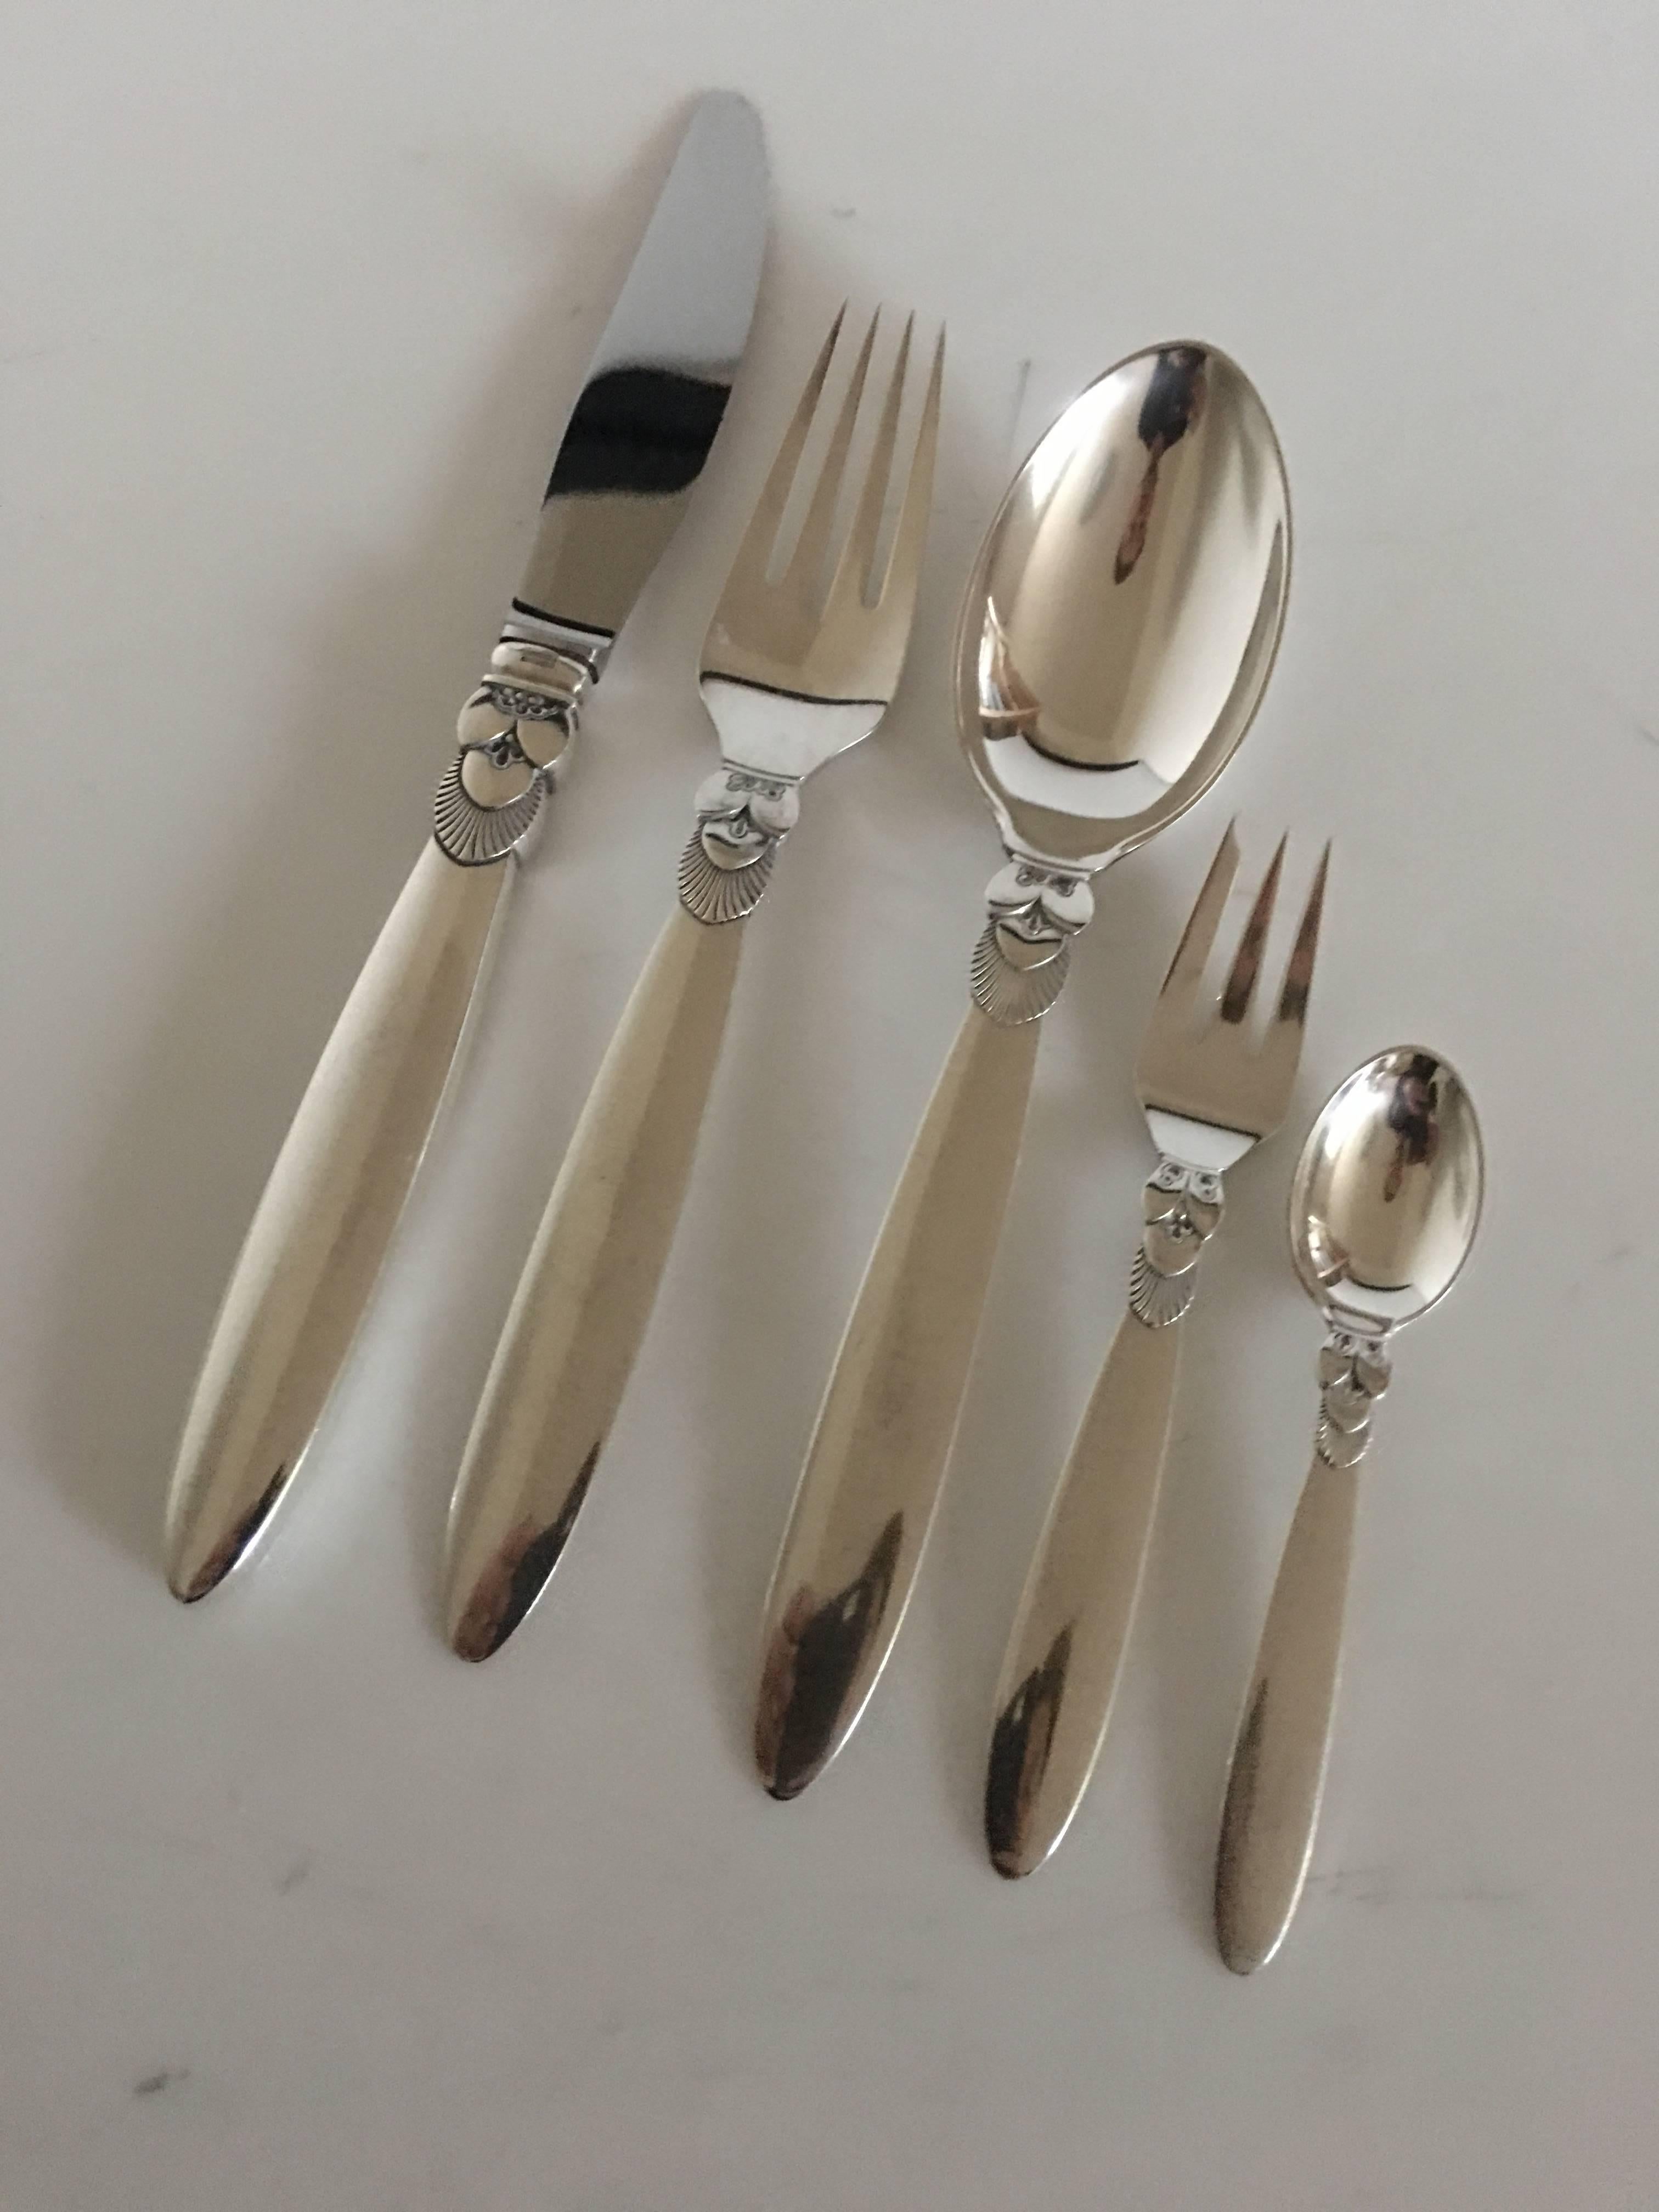 Georg Jensen sterling silver cactus flatware set for 12 people. 60 pieces. The set consists of the following items: 

12 dinner knives with long handle 23 cm L
12 dinner forks 18.5 cm L
12 dinner spoons 19 cm L
12 pastry forks 13 cm L
12